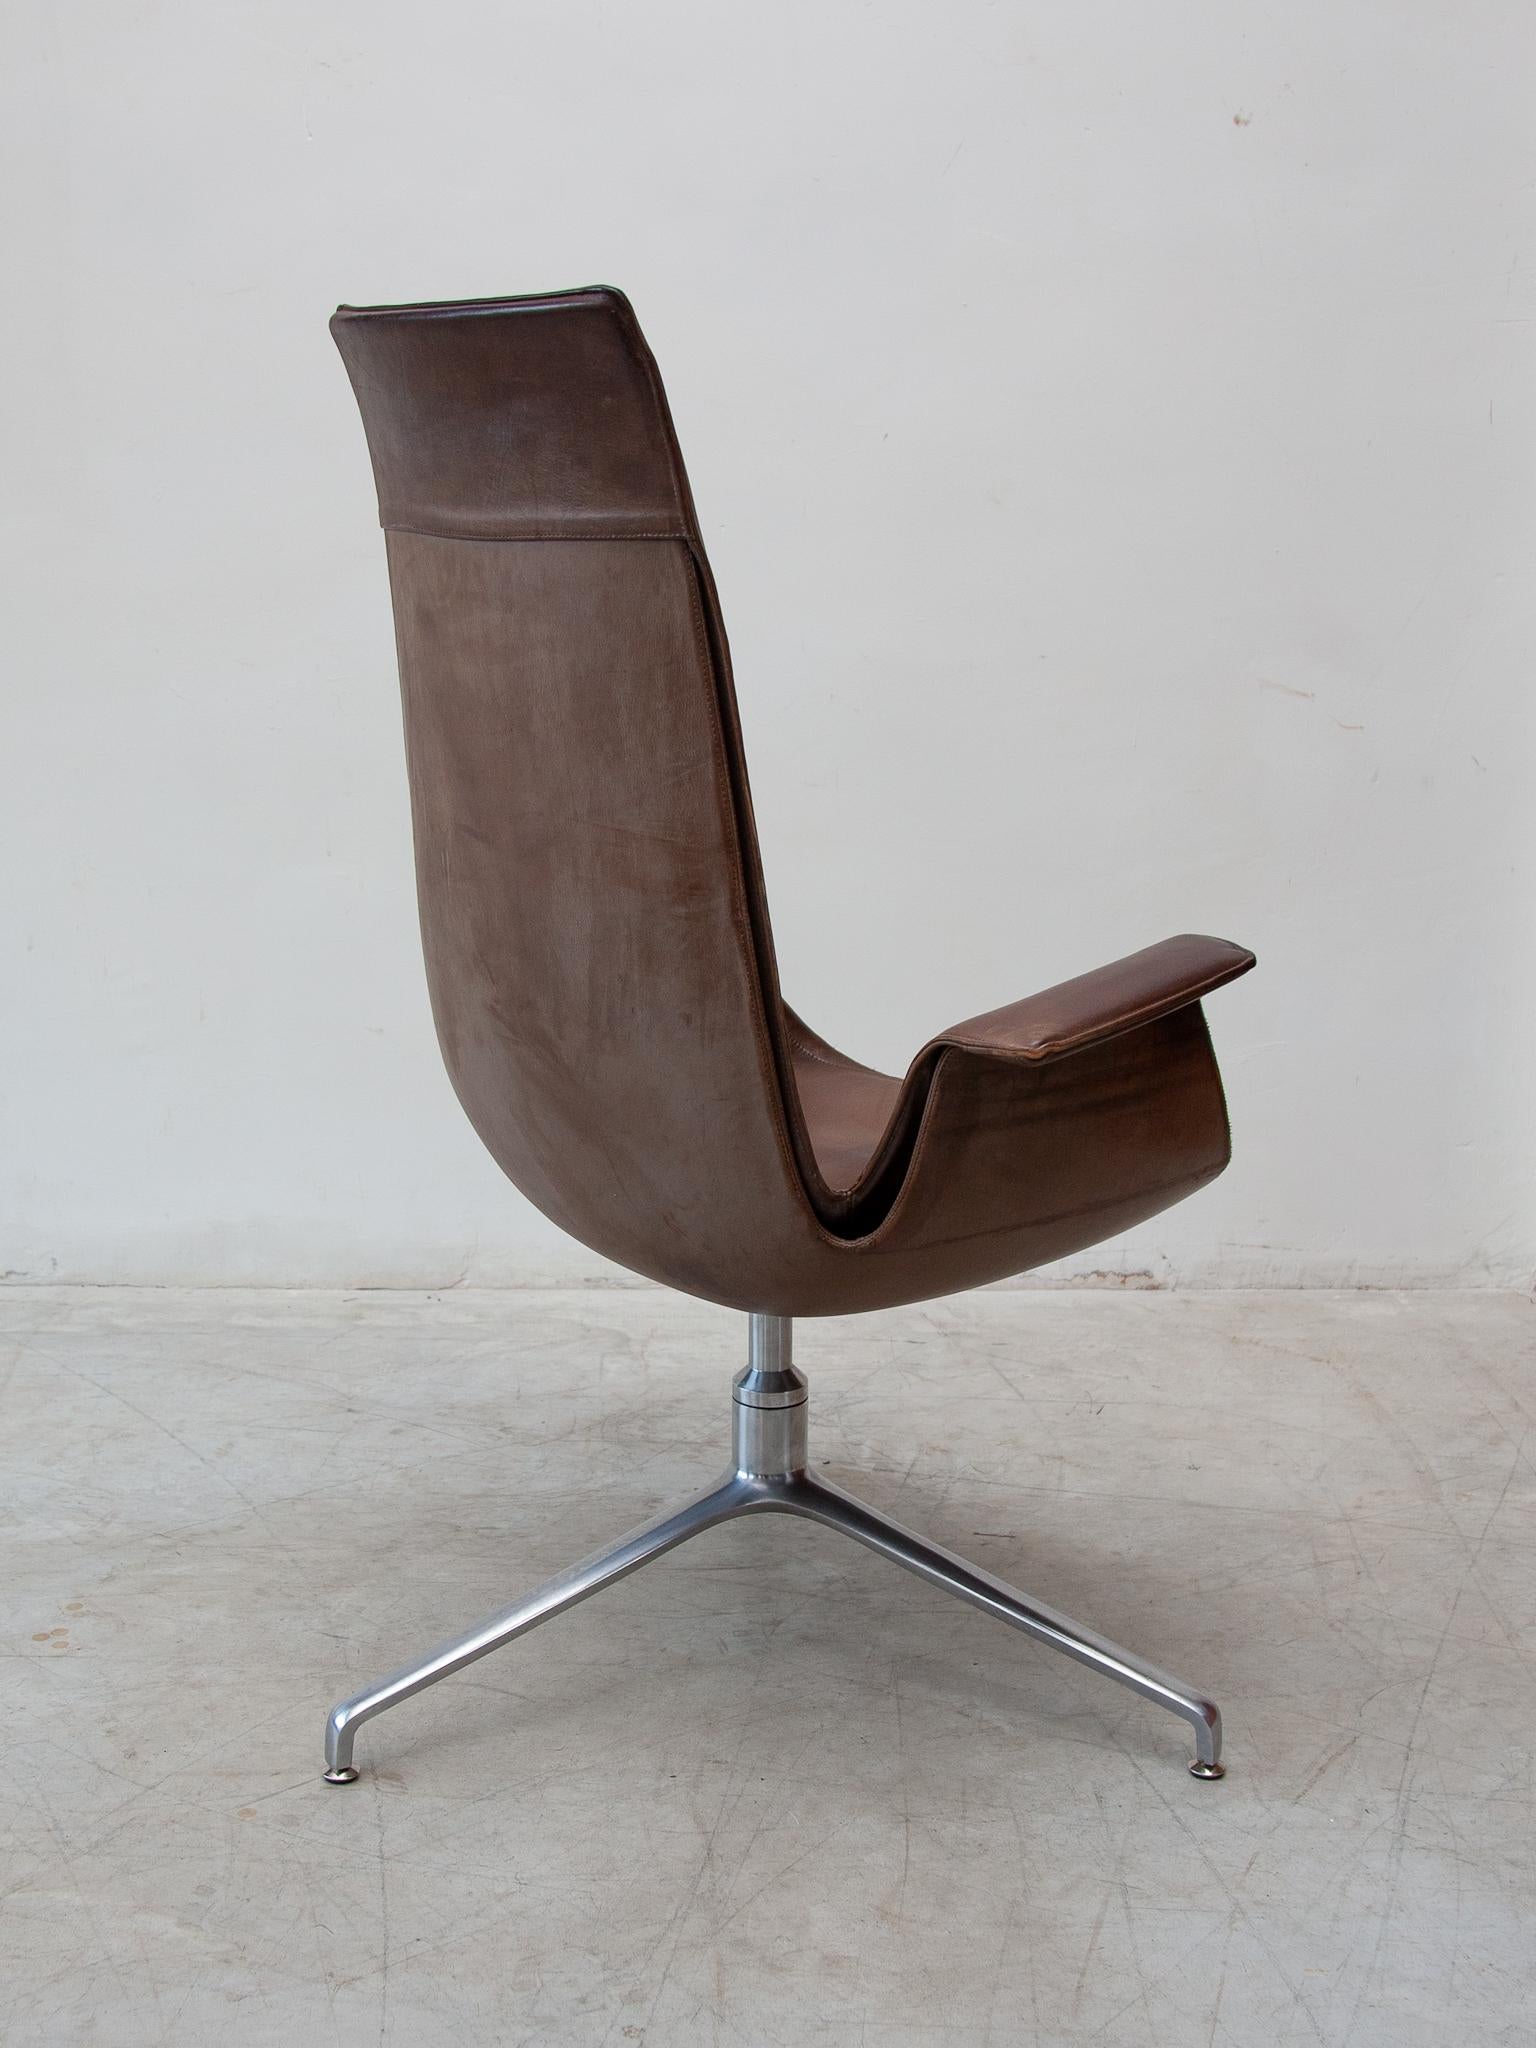 Fabricius & Kastholm FK6725 Desk, Lounge Chair in Brown Leather, Kill 5